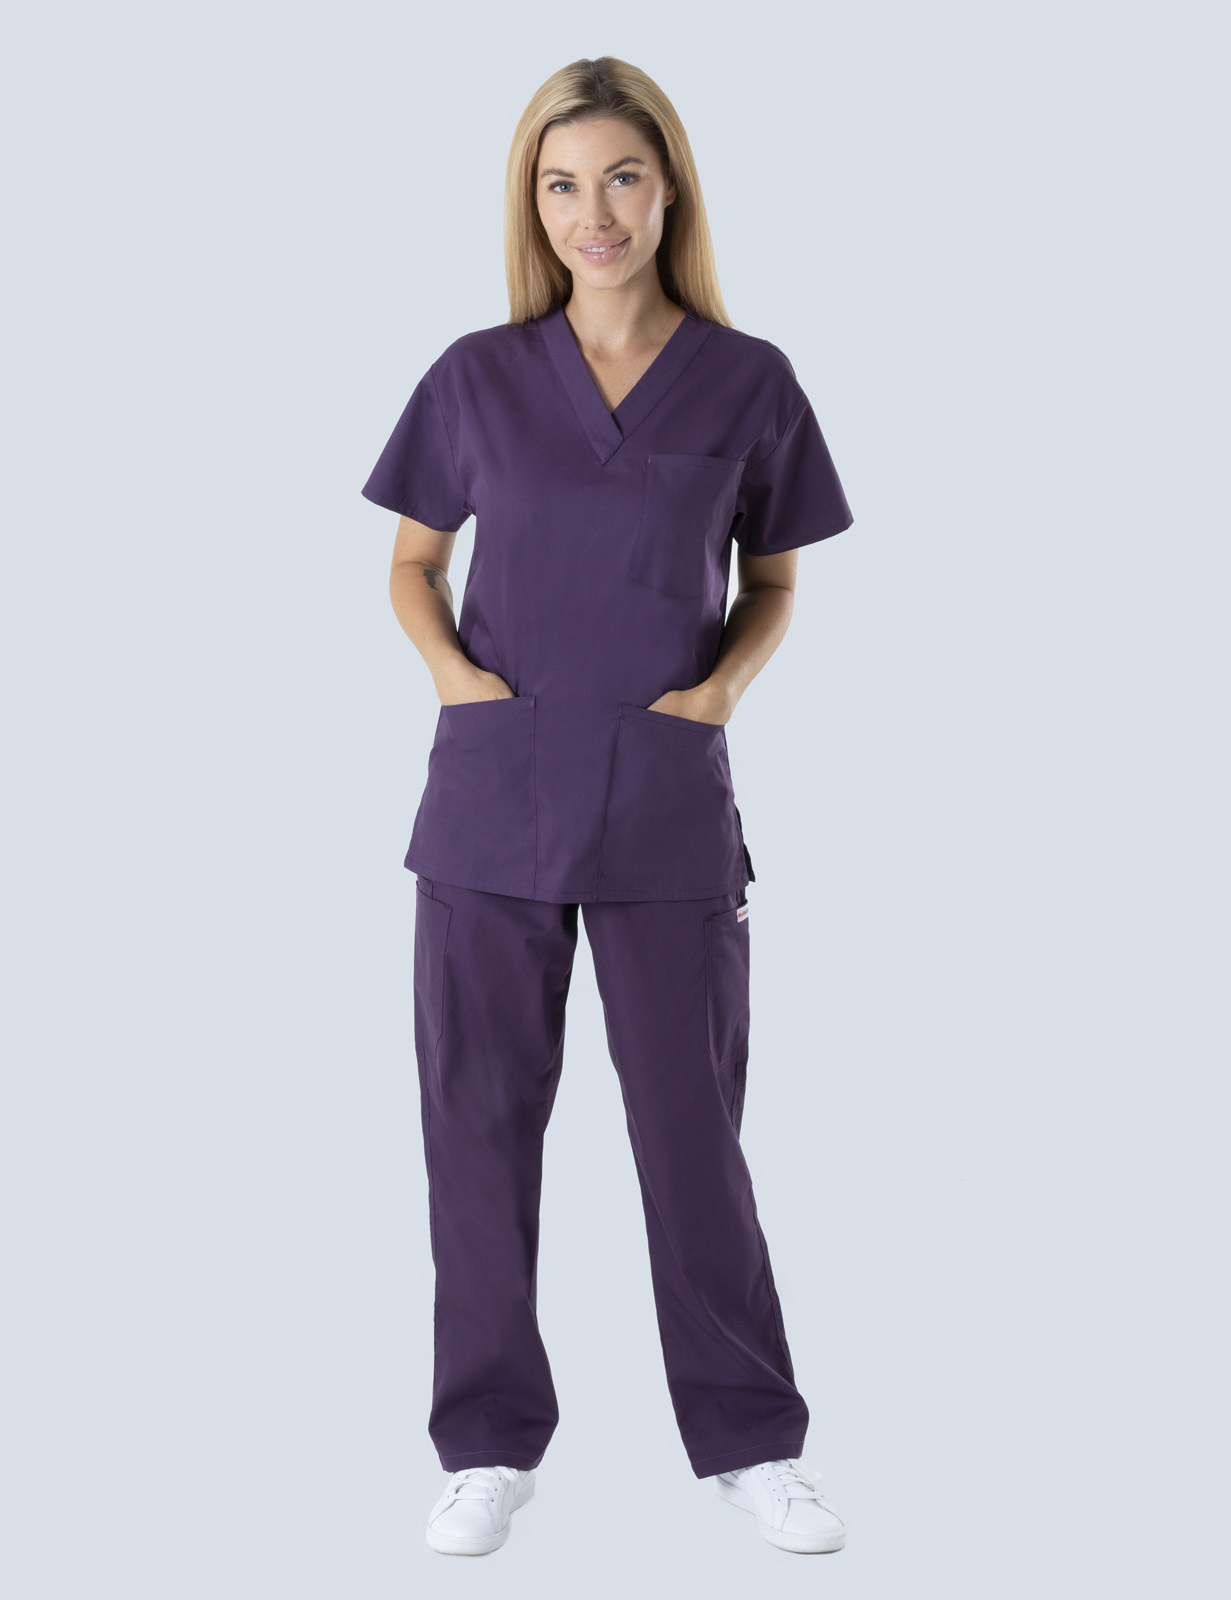 Maleny Hospital - Midwife (4 Pocket Scrub Top and Cargo Pants in Aubergine incl Logos)